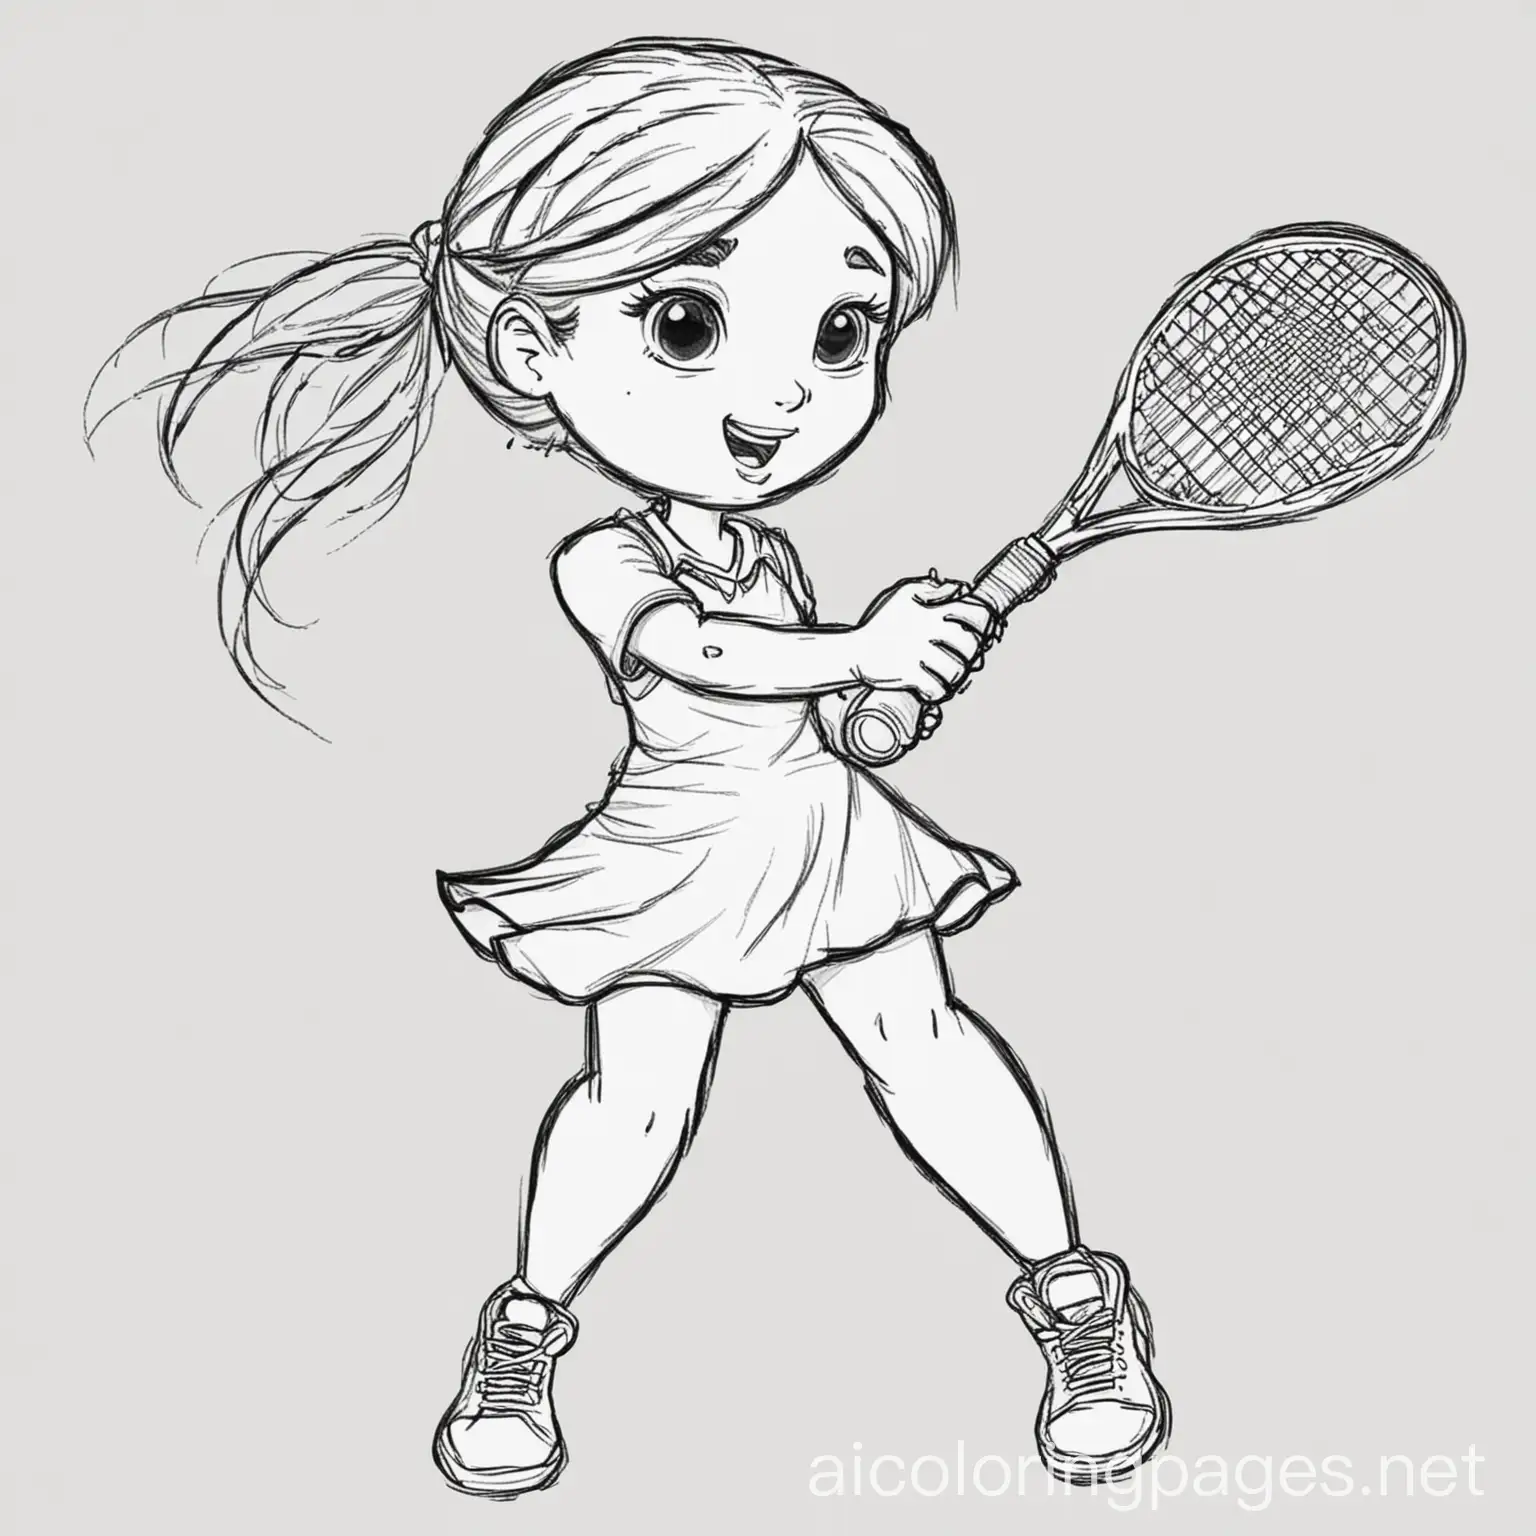 Female fly playing tennis, Coloring Page, black and white, line art, white background, Simplicity, Ample White Space. The background of the coloring page is plain white to make it easy for young children to color within the lines. The outlines of all the subjects are easy to distinguish, making it simple for kids to color without too much difficulty